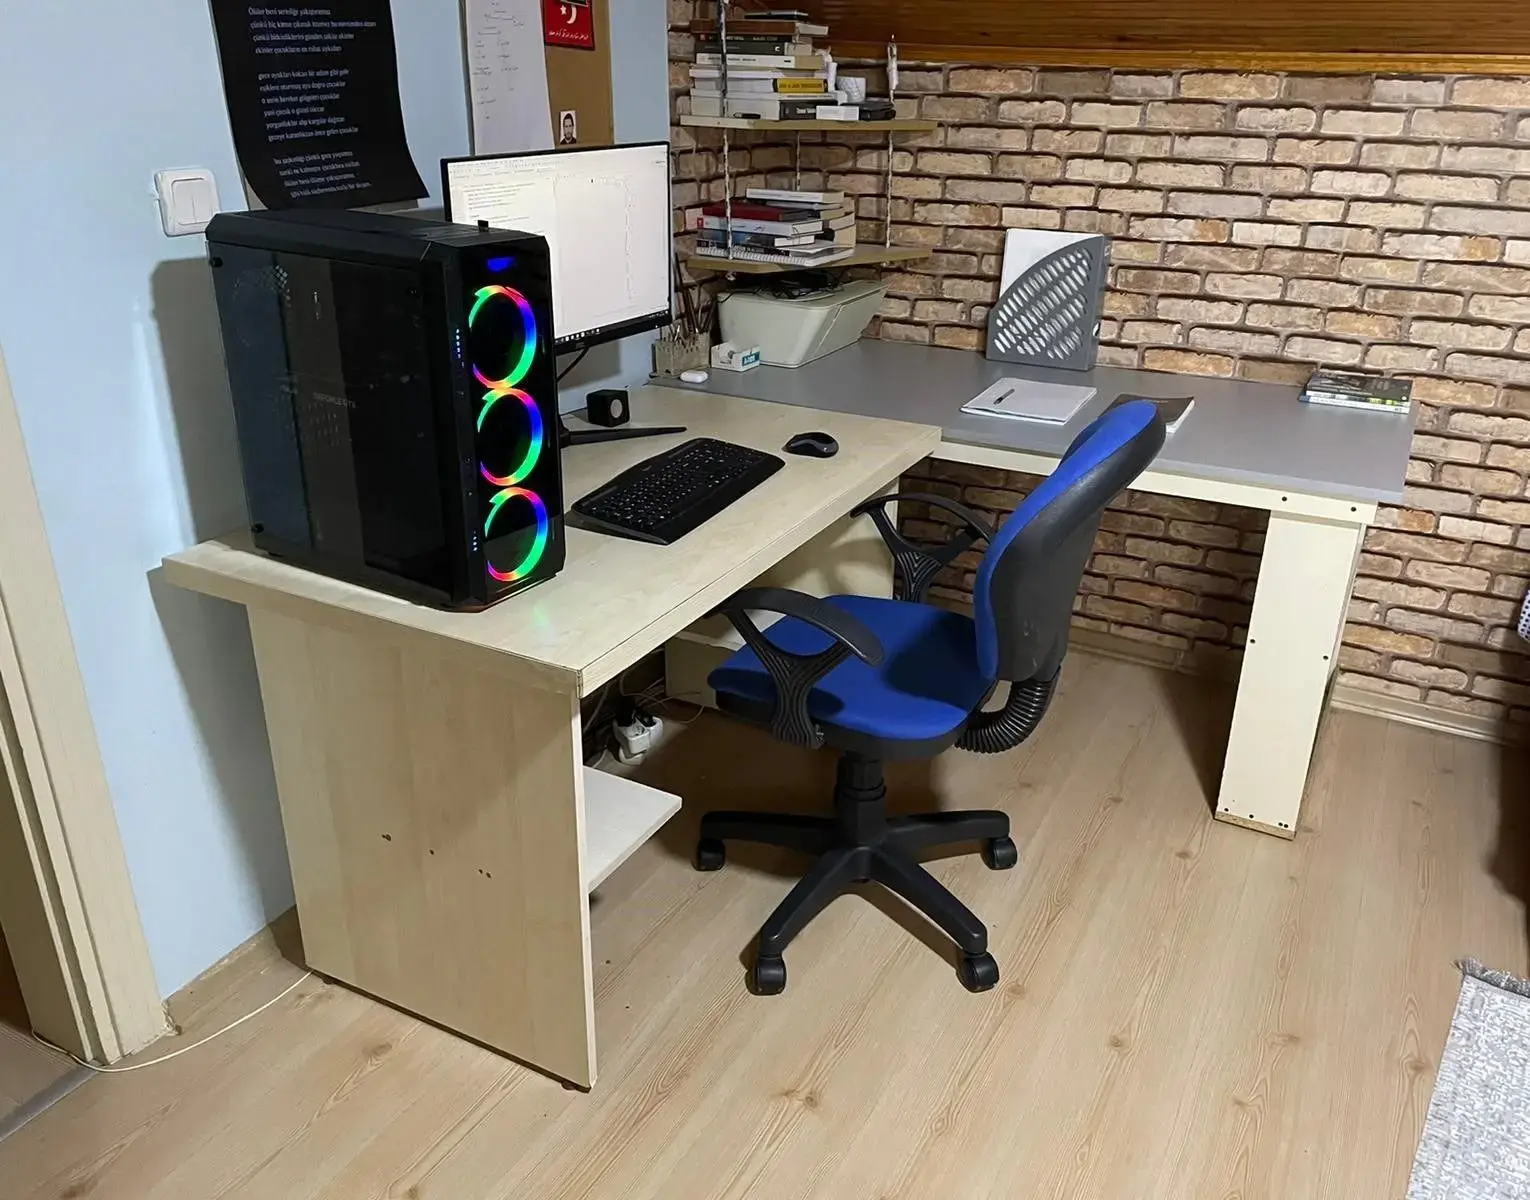 How do you use your desk? 